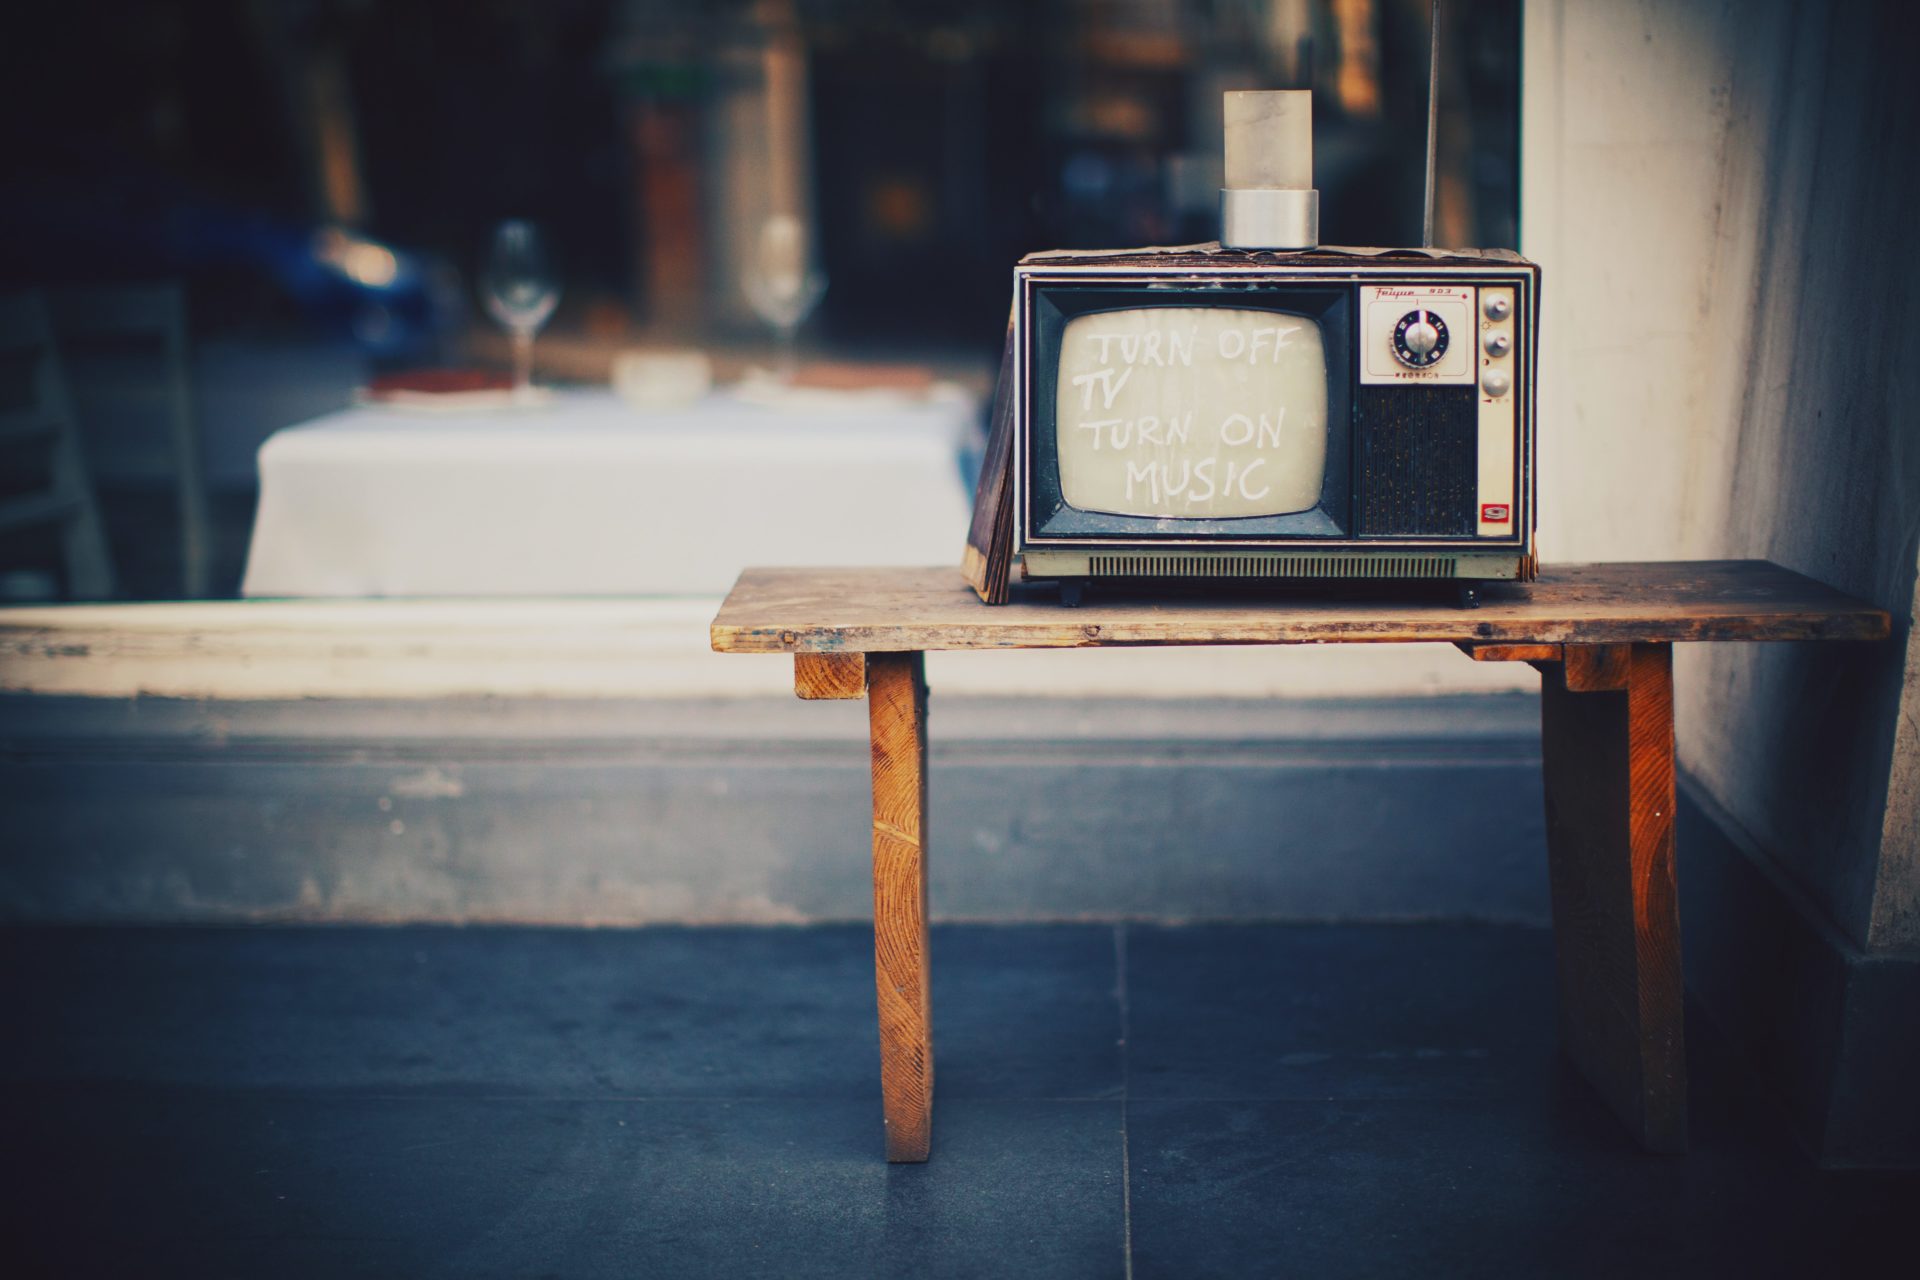 The Collapse of Television in Japan